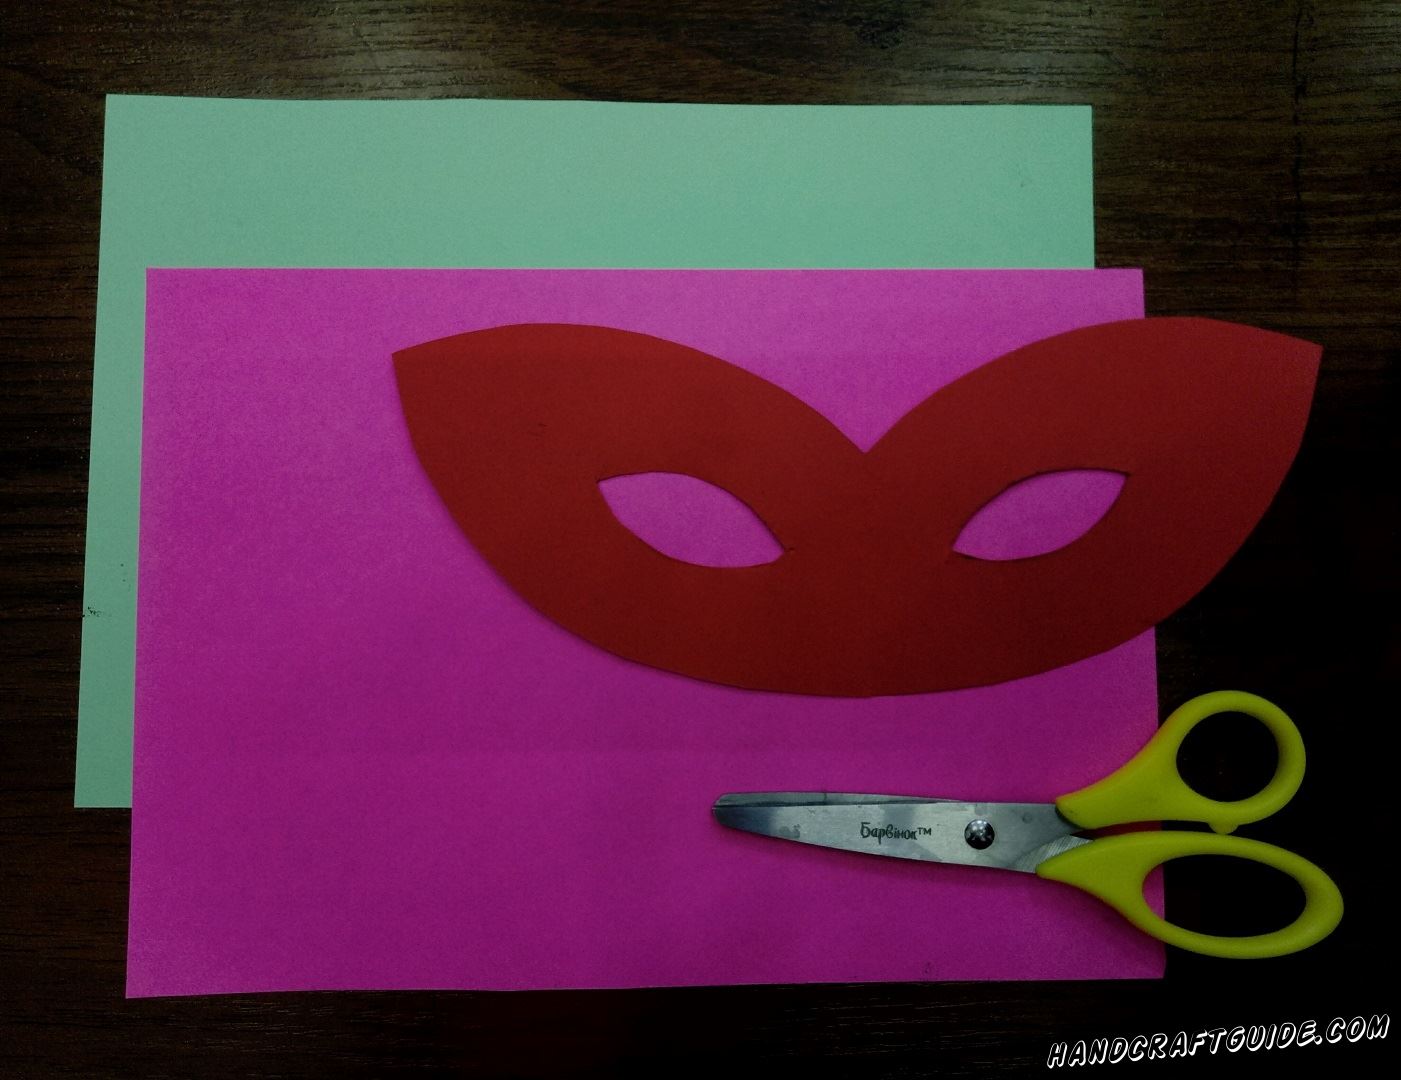 First, take red paper and cut out the basis of the mask, do not forget to cut holes for the eyes, so you can see when you wear it.